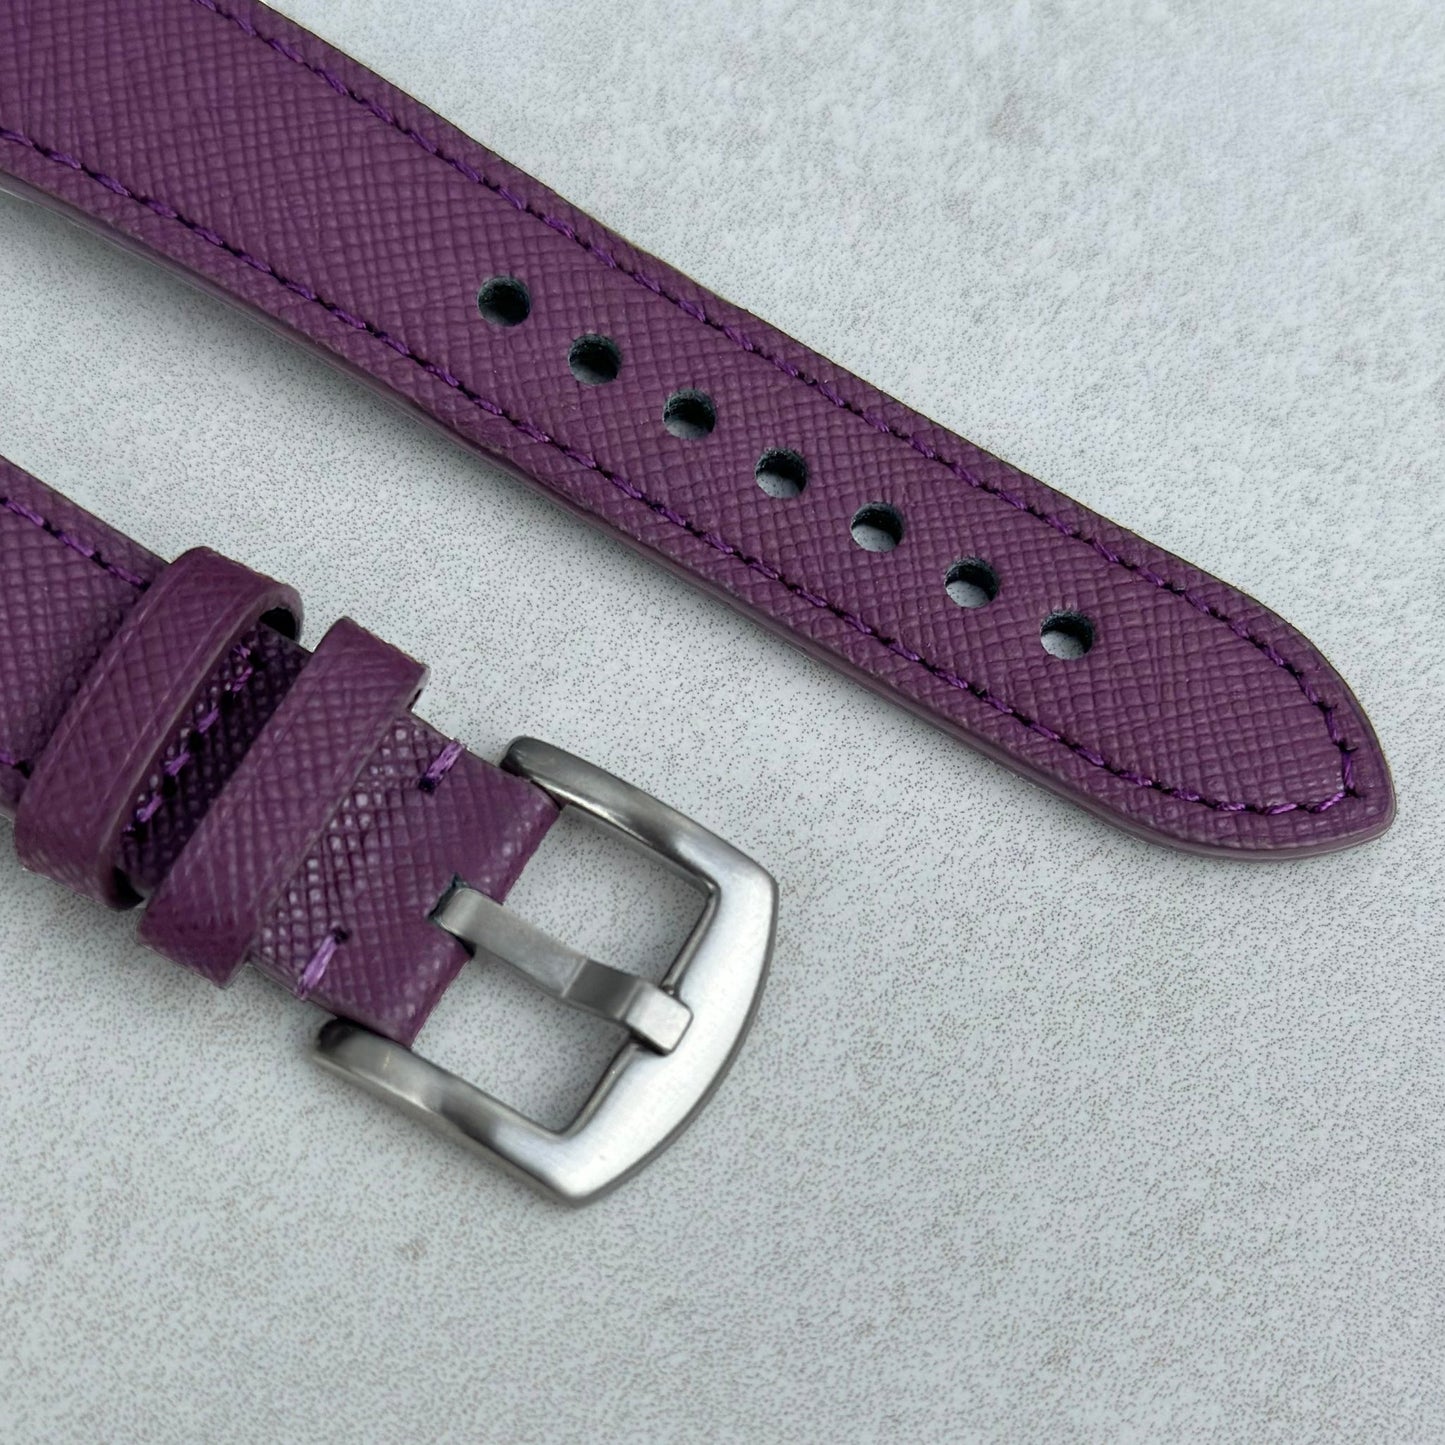 Brushed 316L stainless steel buckle on the Florence Saffiano leather watch strap. Watch And Strap